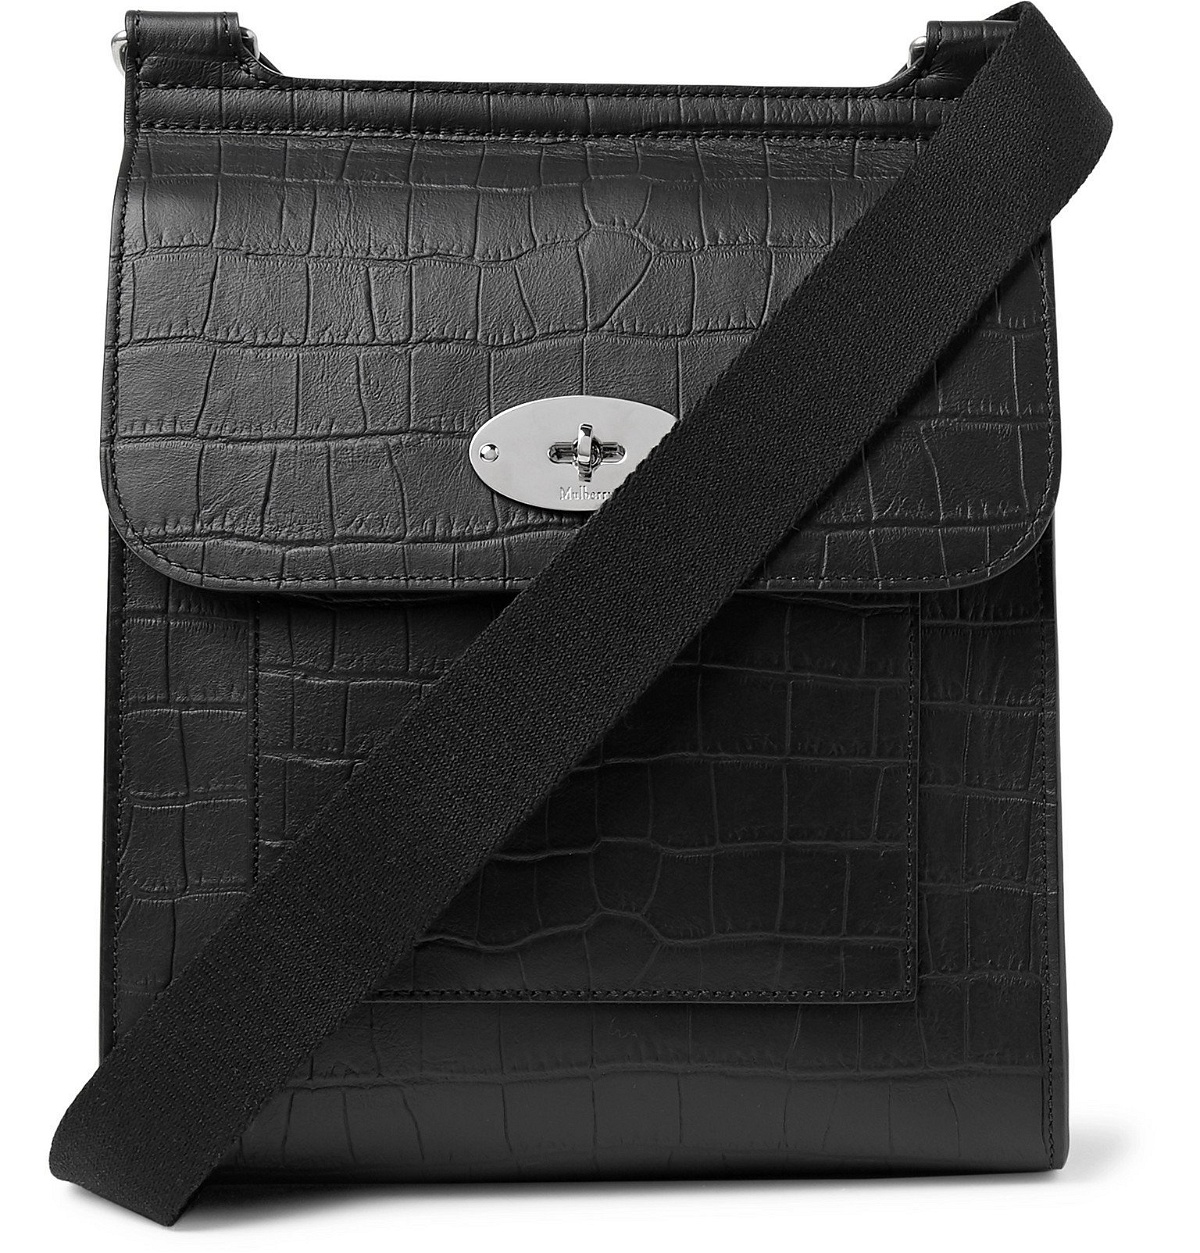 Mulberry Black Leather Antony Messenger Bag Mulberry